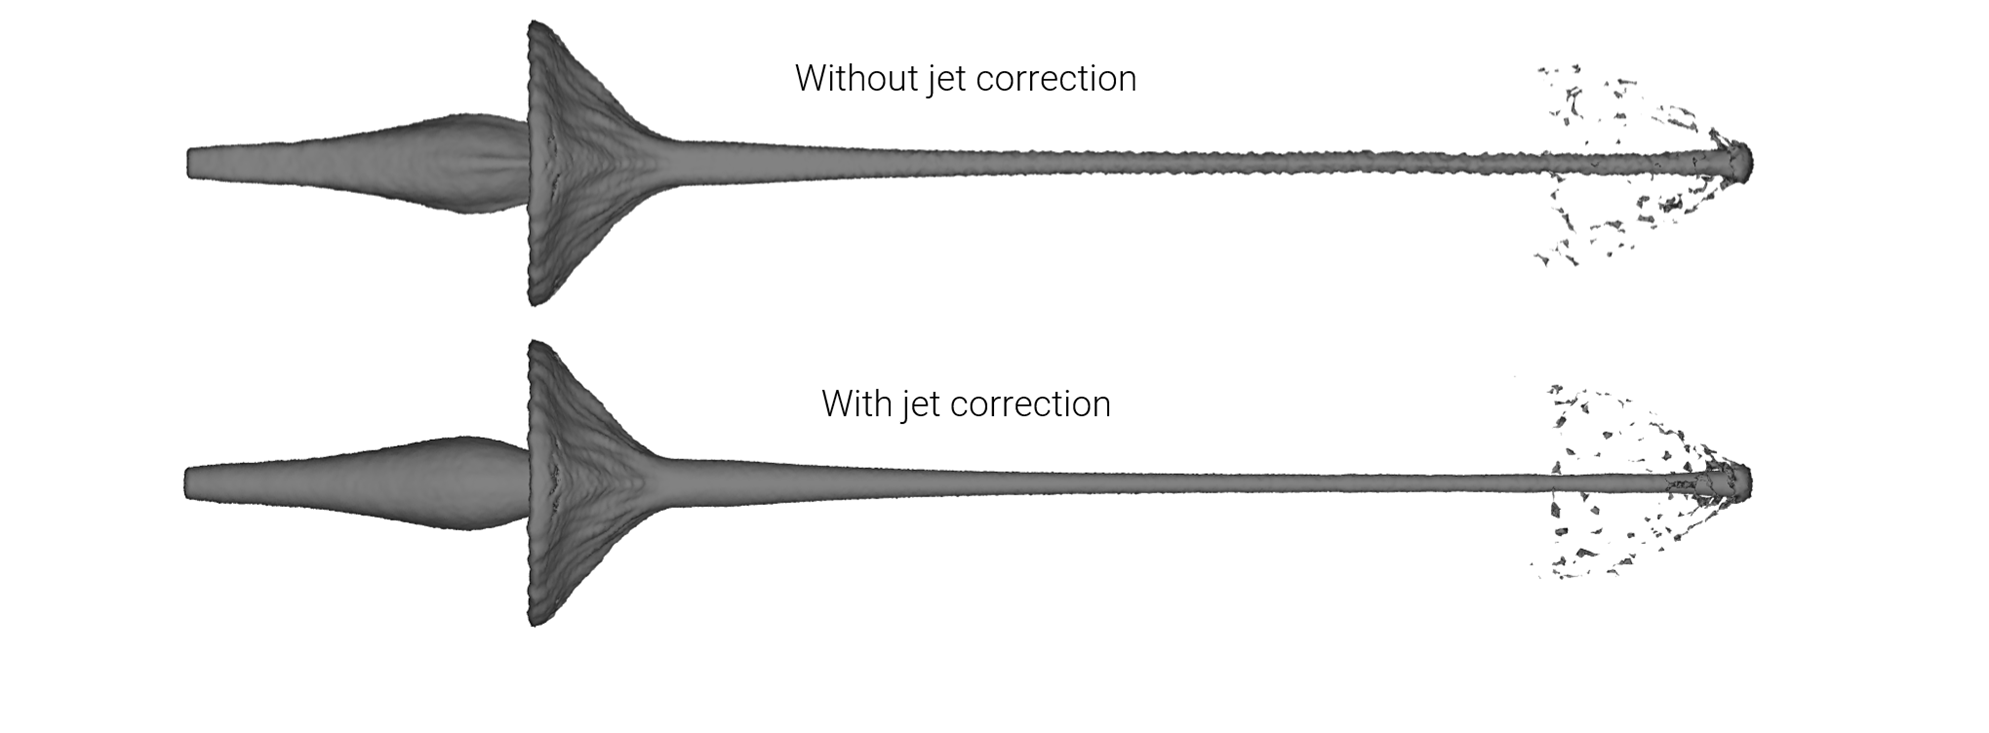 Shaped charge jet, with and without correction